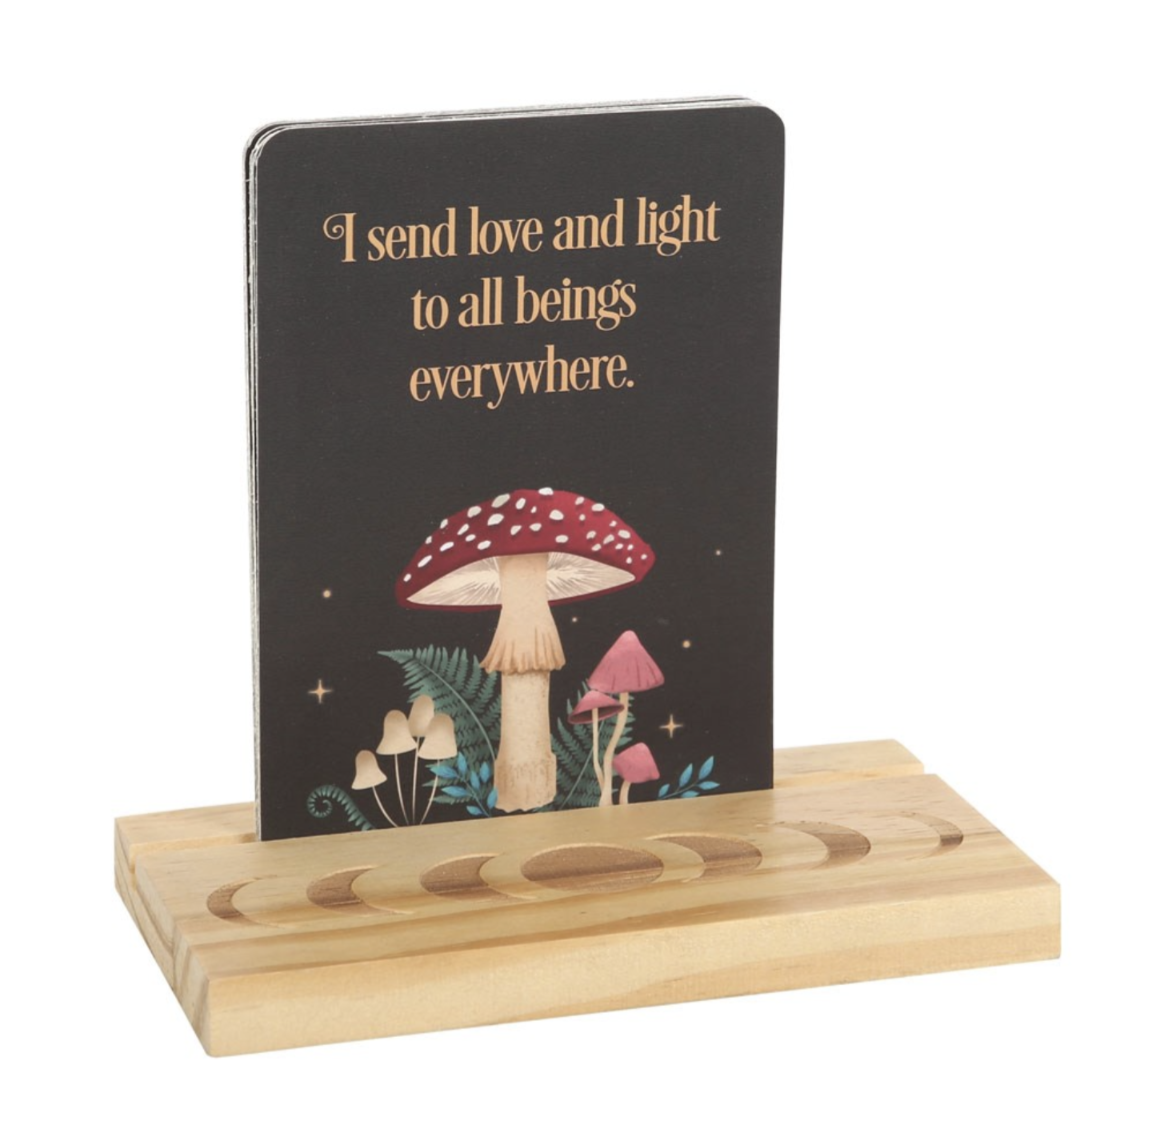 Affirmation cards with wooden stand